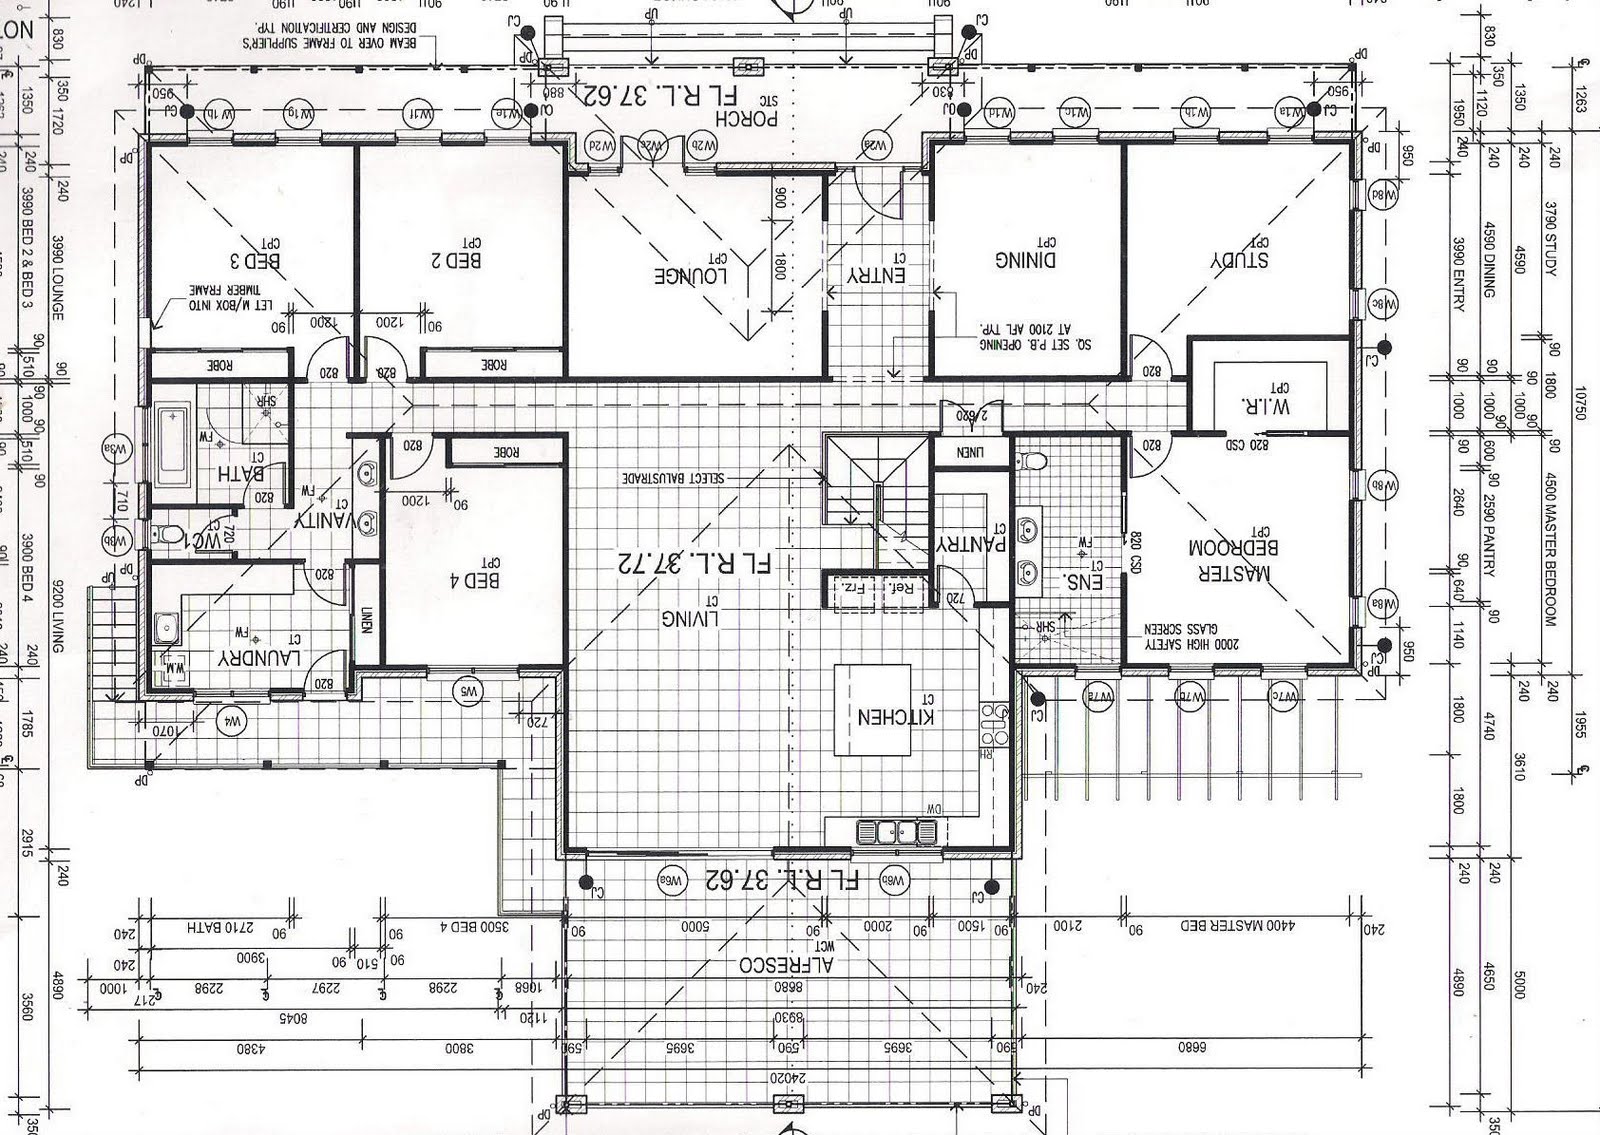 This is the upstairs floor plan.